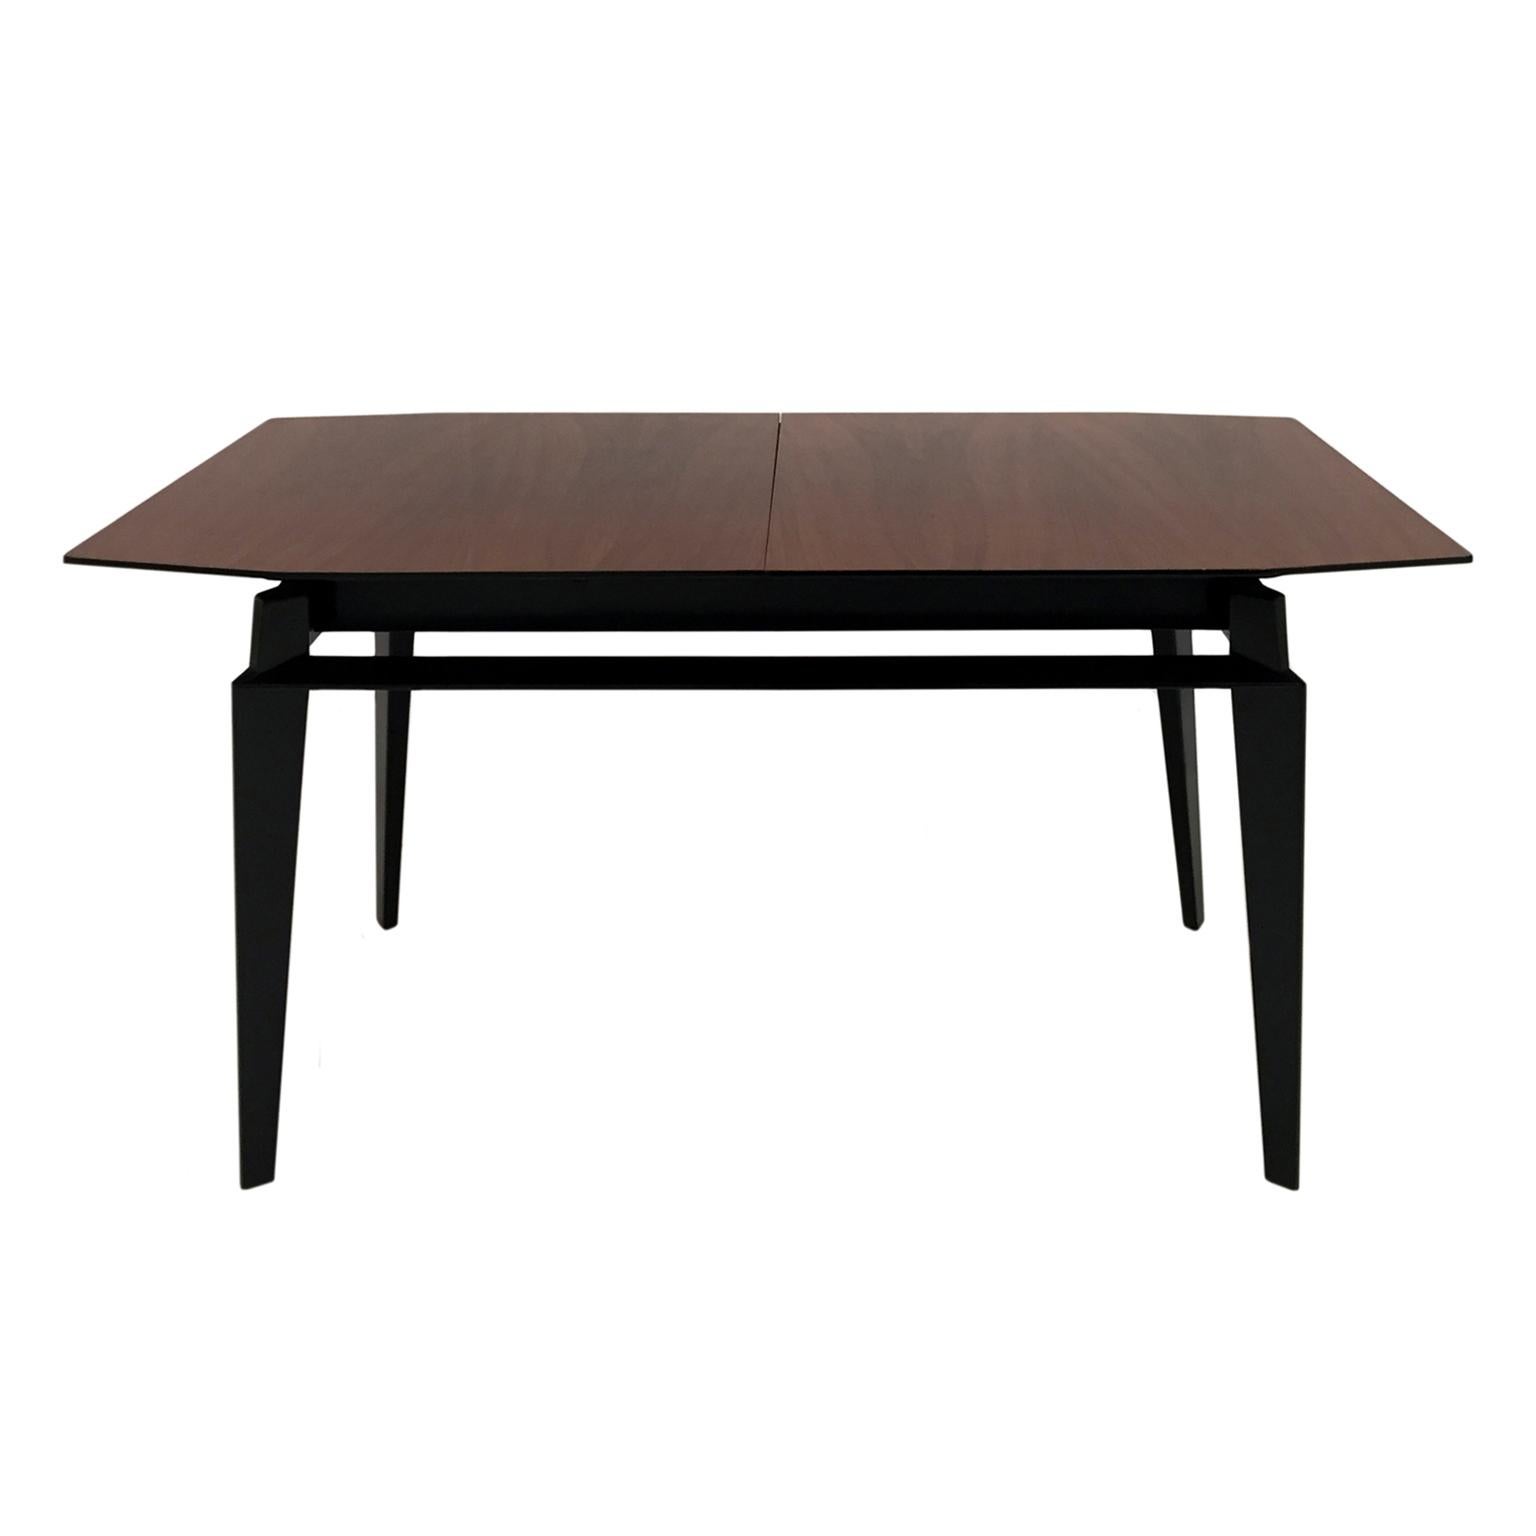 Midcentury extendable dining table by Vittorio Dassi featuring a rosewood veneer tabletop and tapered legs with stretchers. Includes one 12 inch leaf. Italy, 1950s.